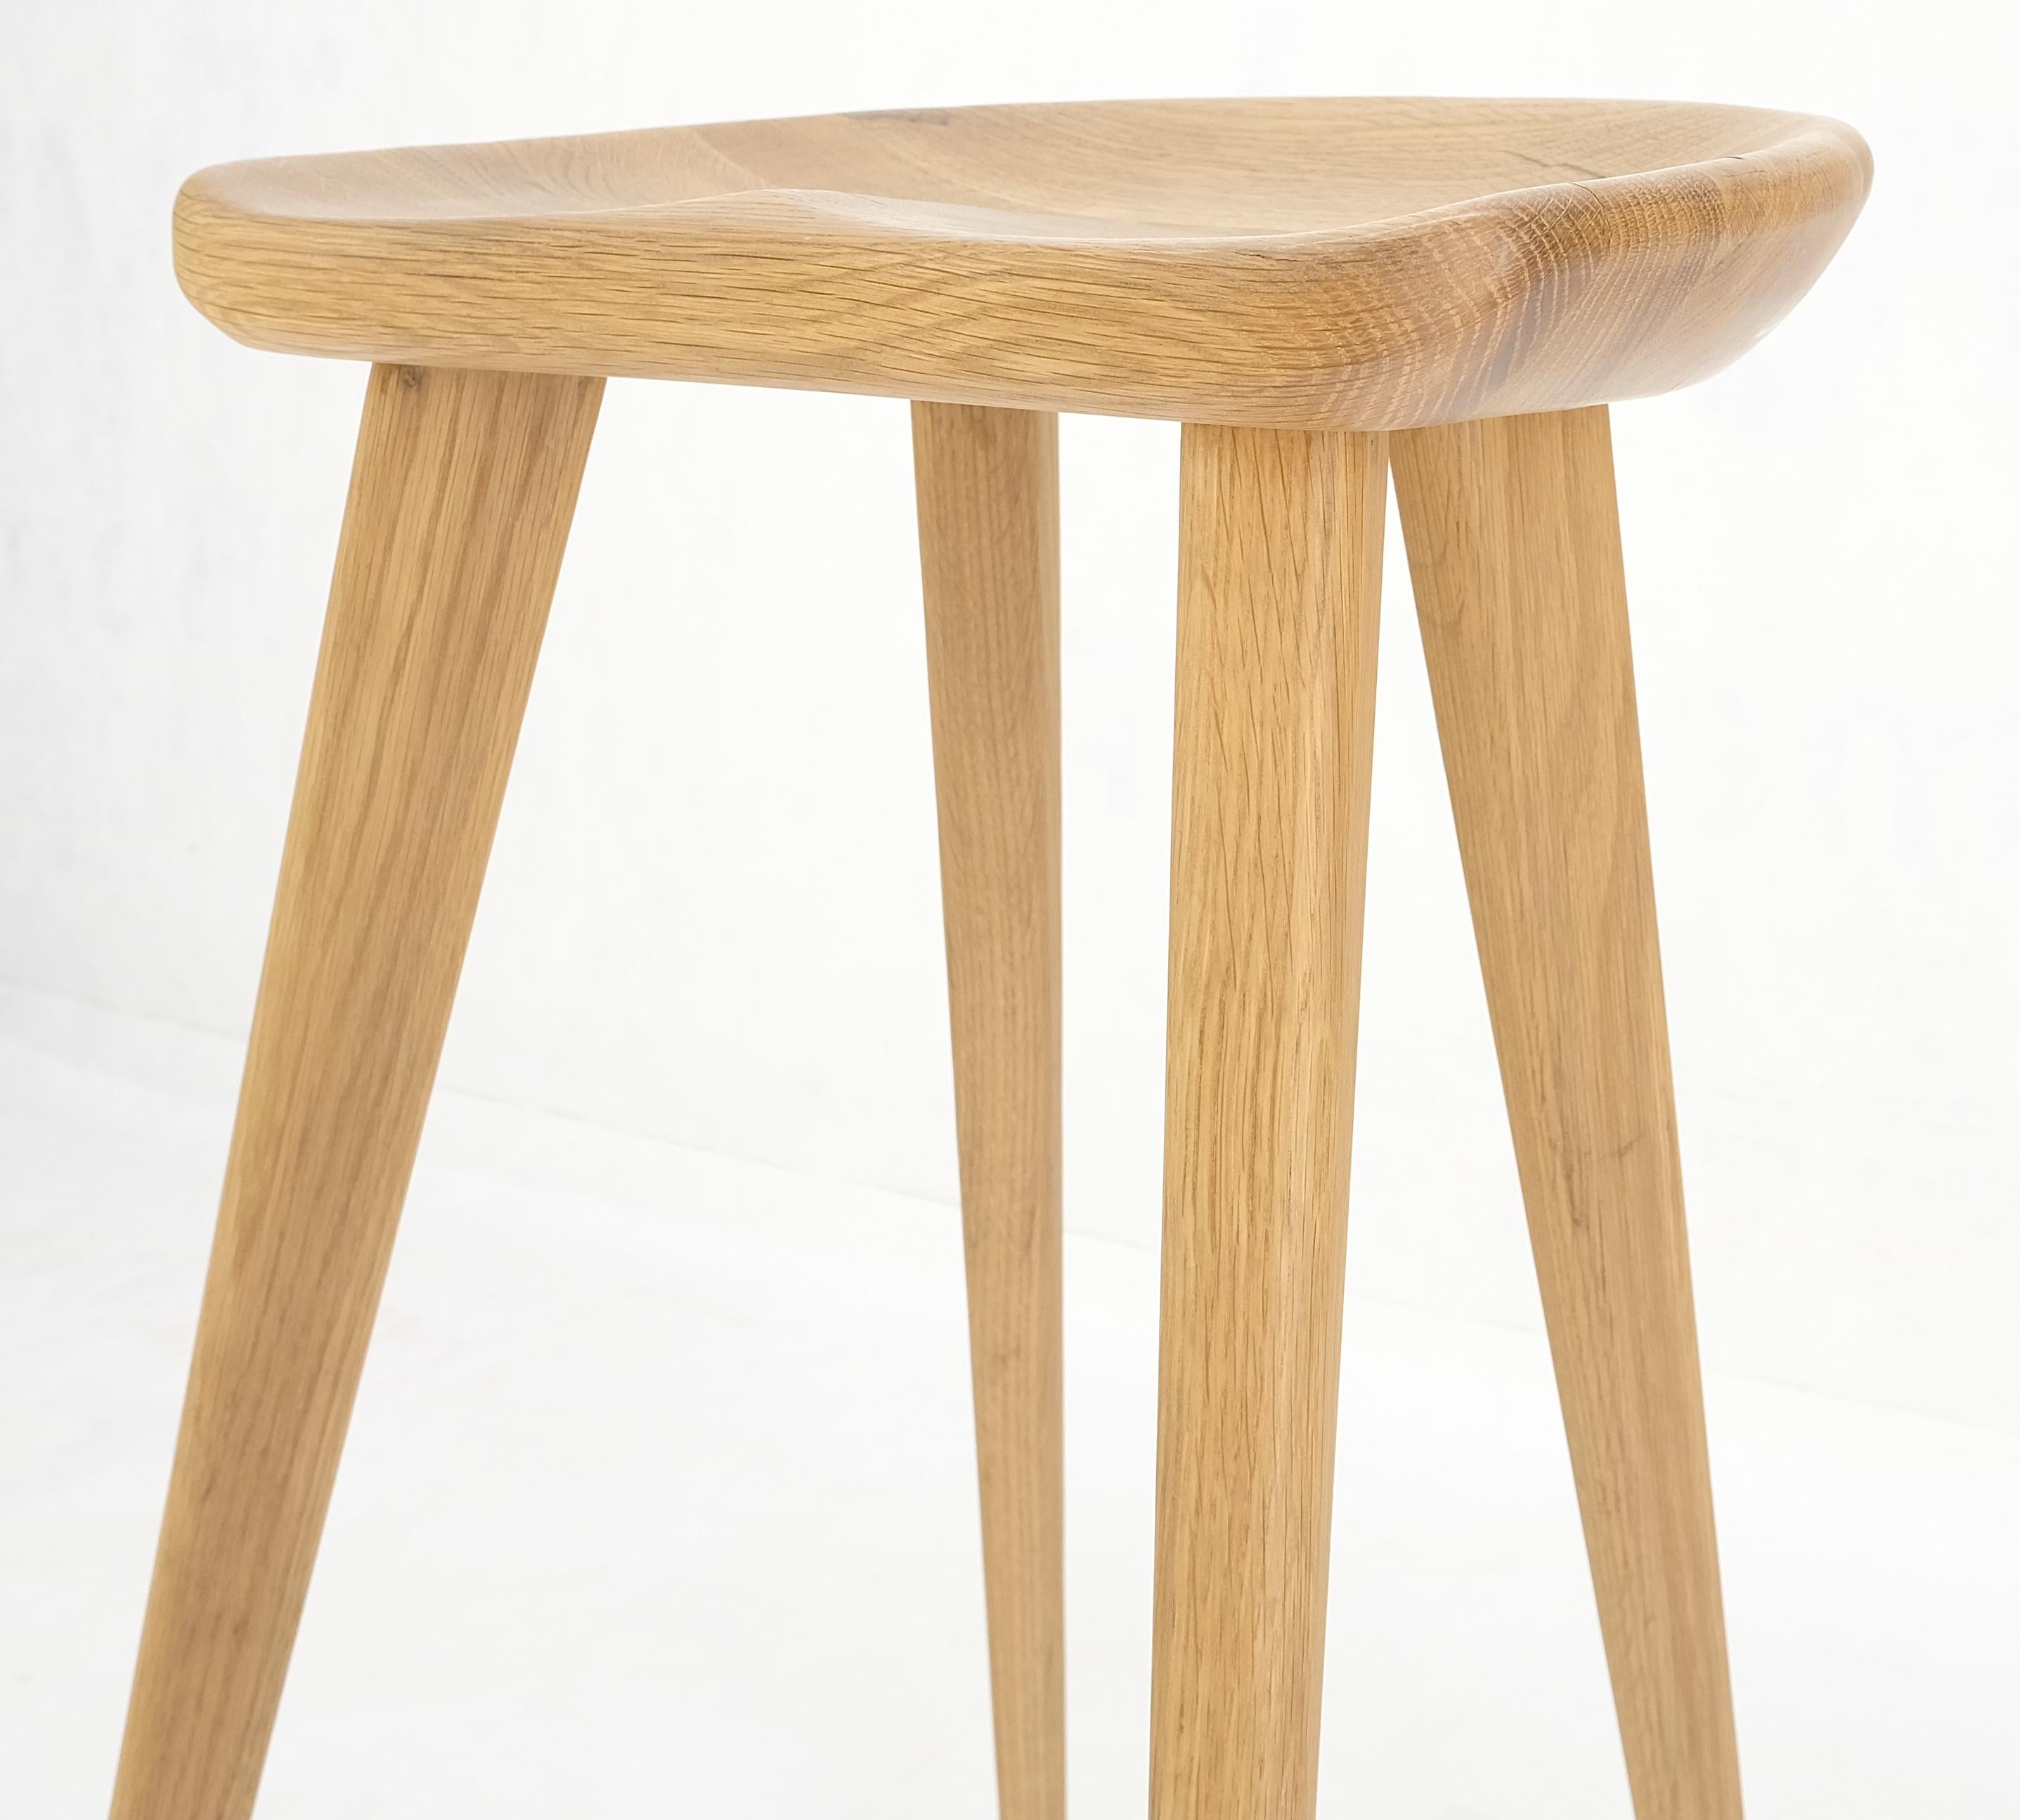 Lacquered Solid White Oak Tapered Leg Carved Seat Bar Stool MINT! For Sale